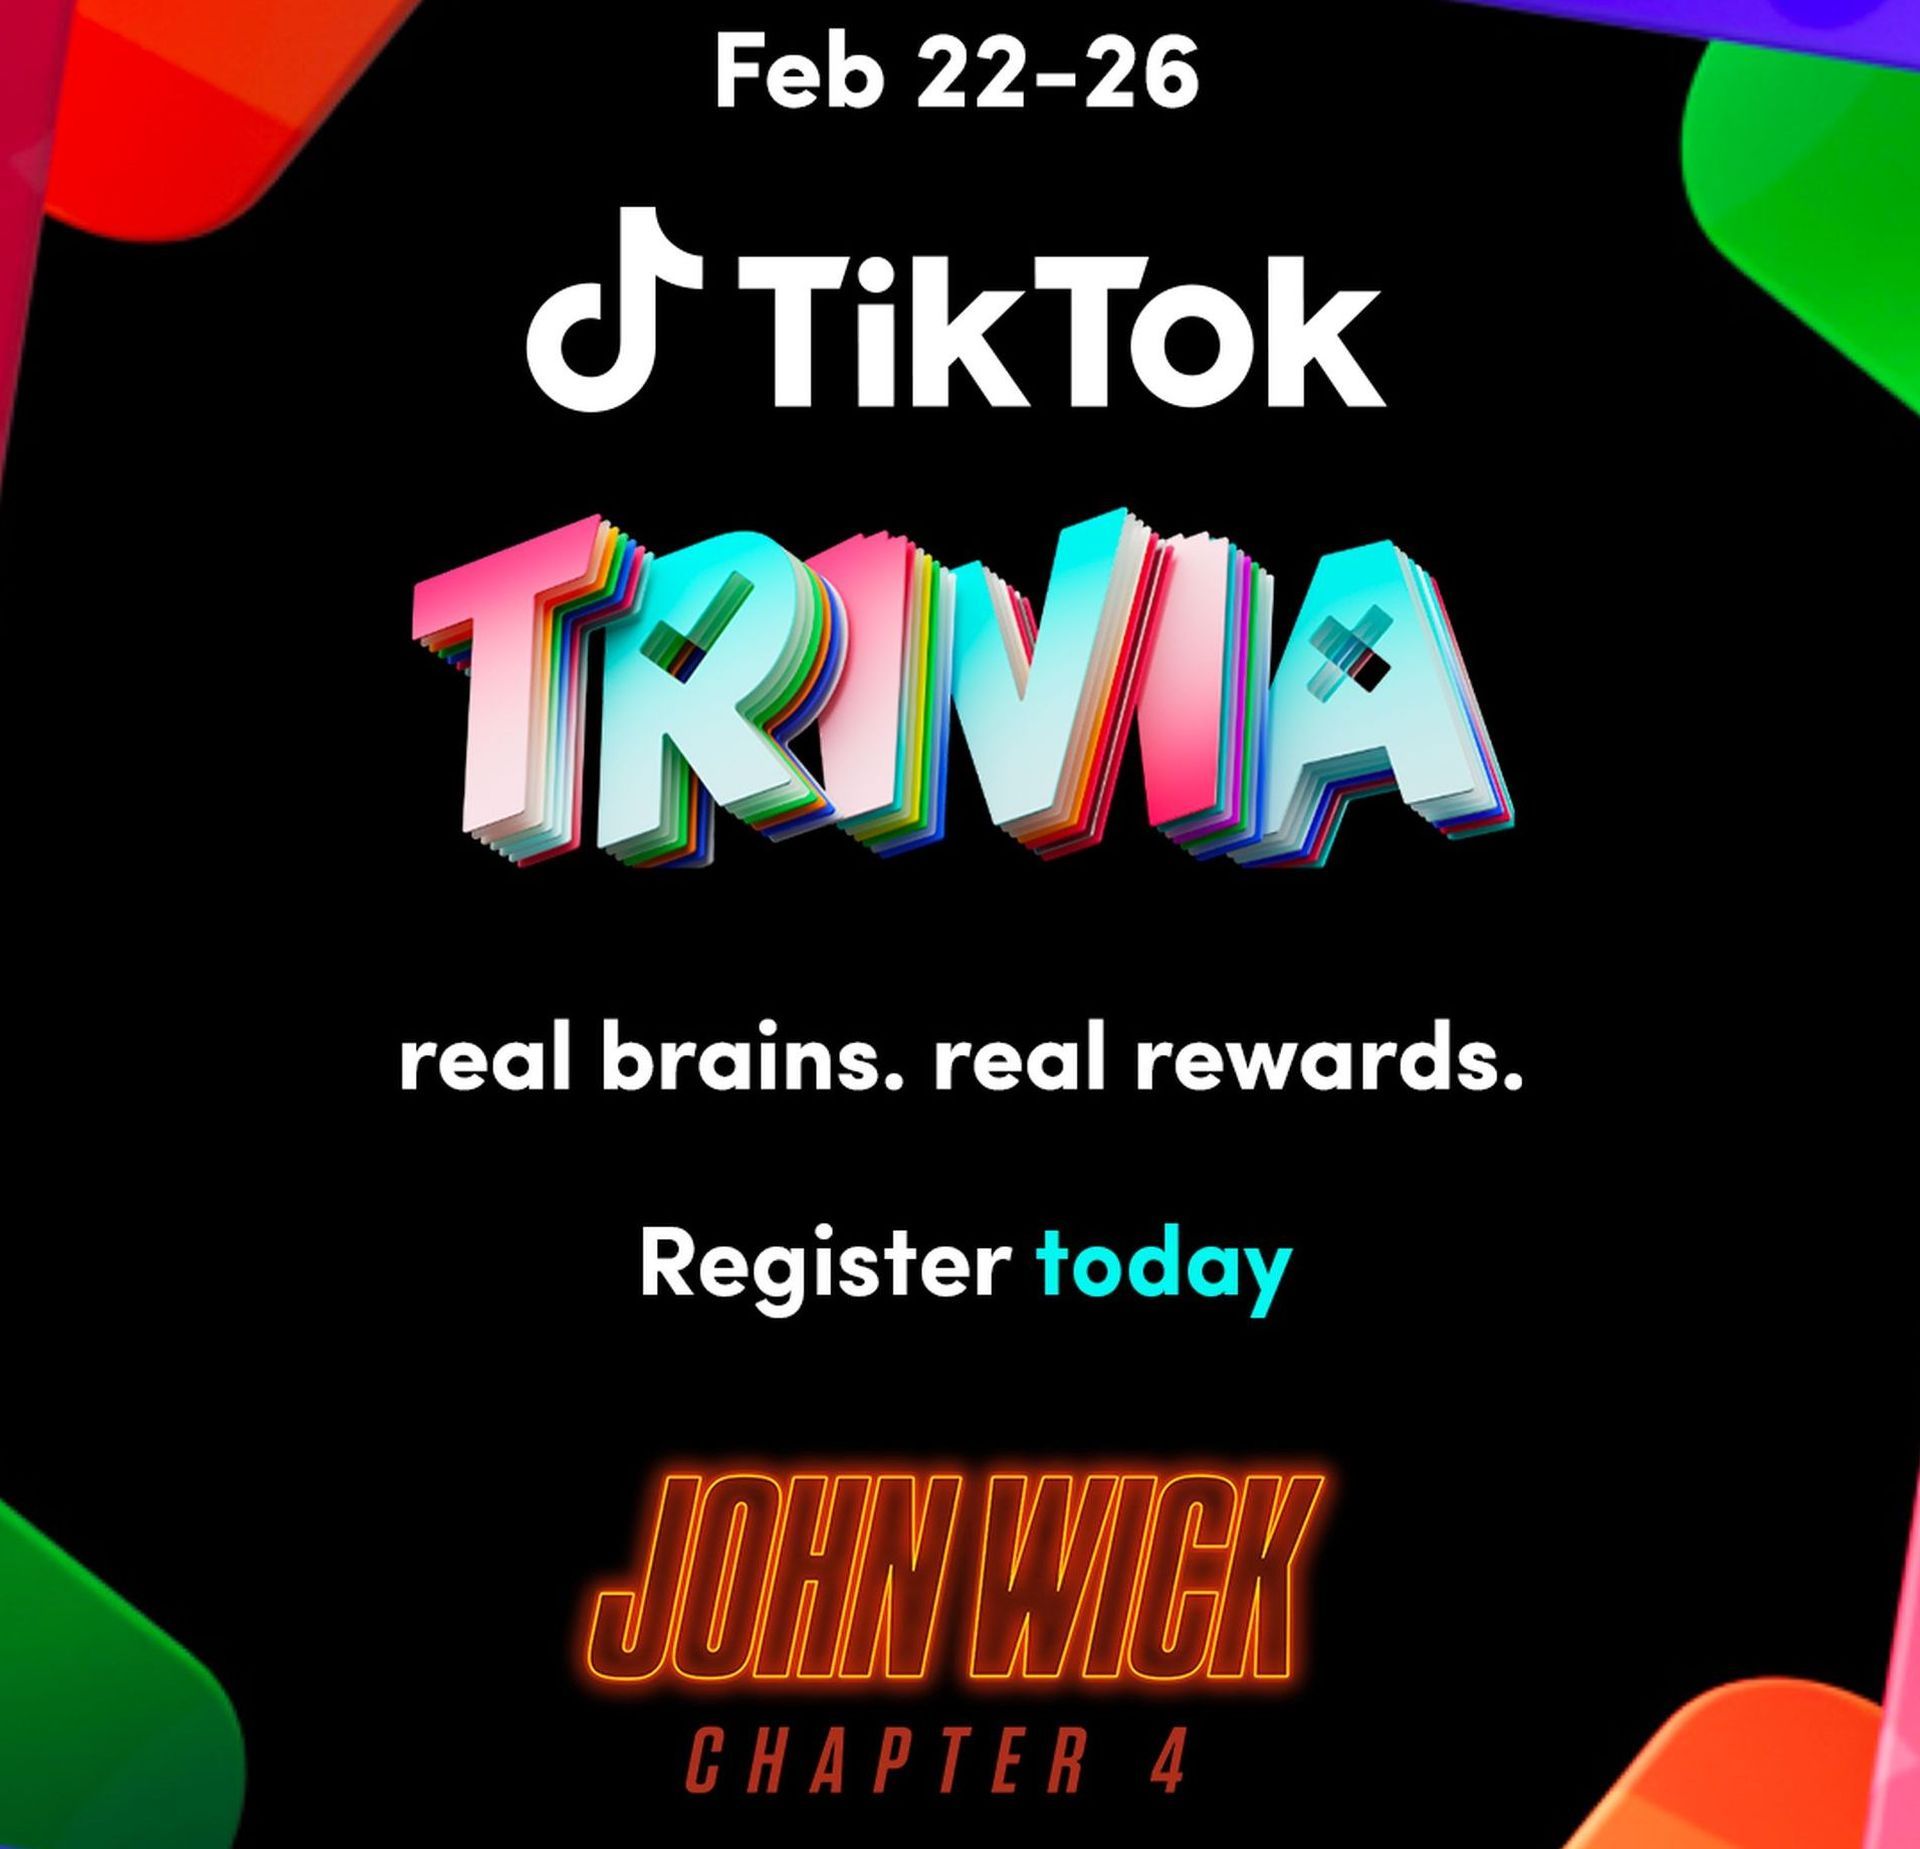 What is TikTok Trivia and how to play it?